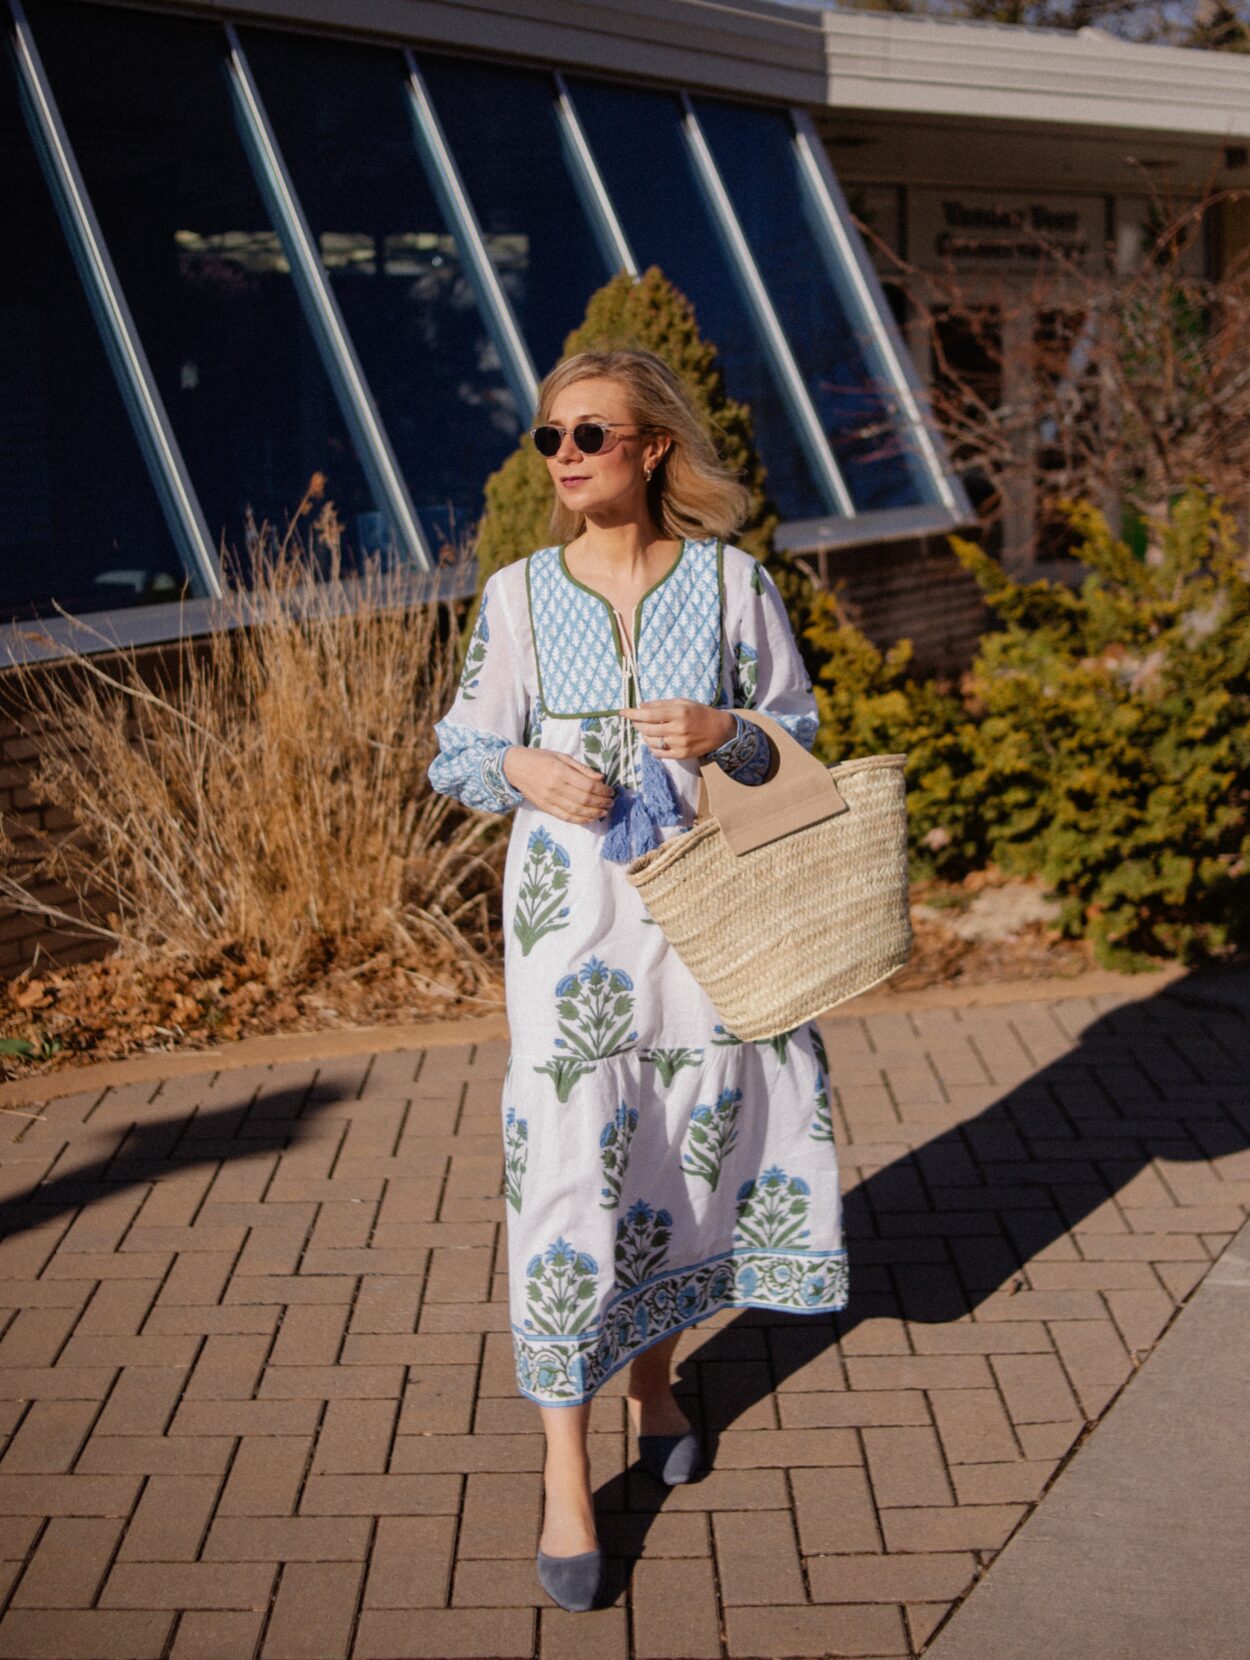 Karin Emily wears a blue and white SZ Block Prints Easter Dress paired with blue mules and a basket bag